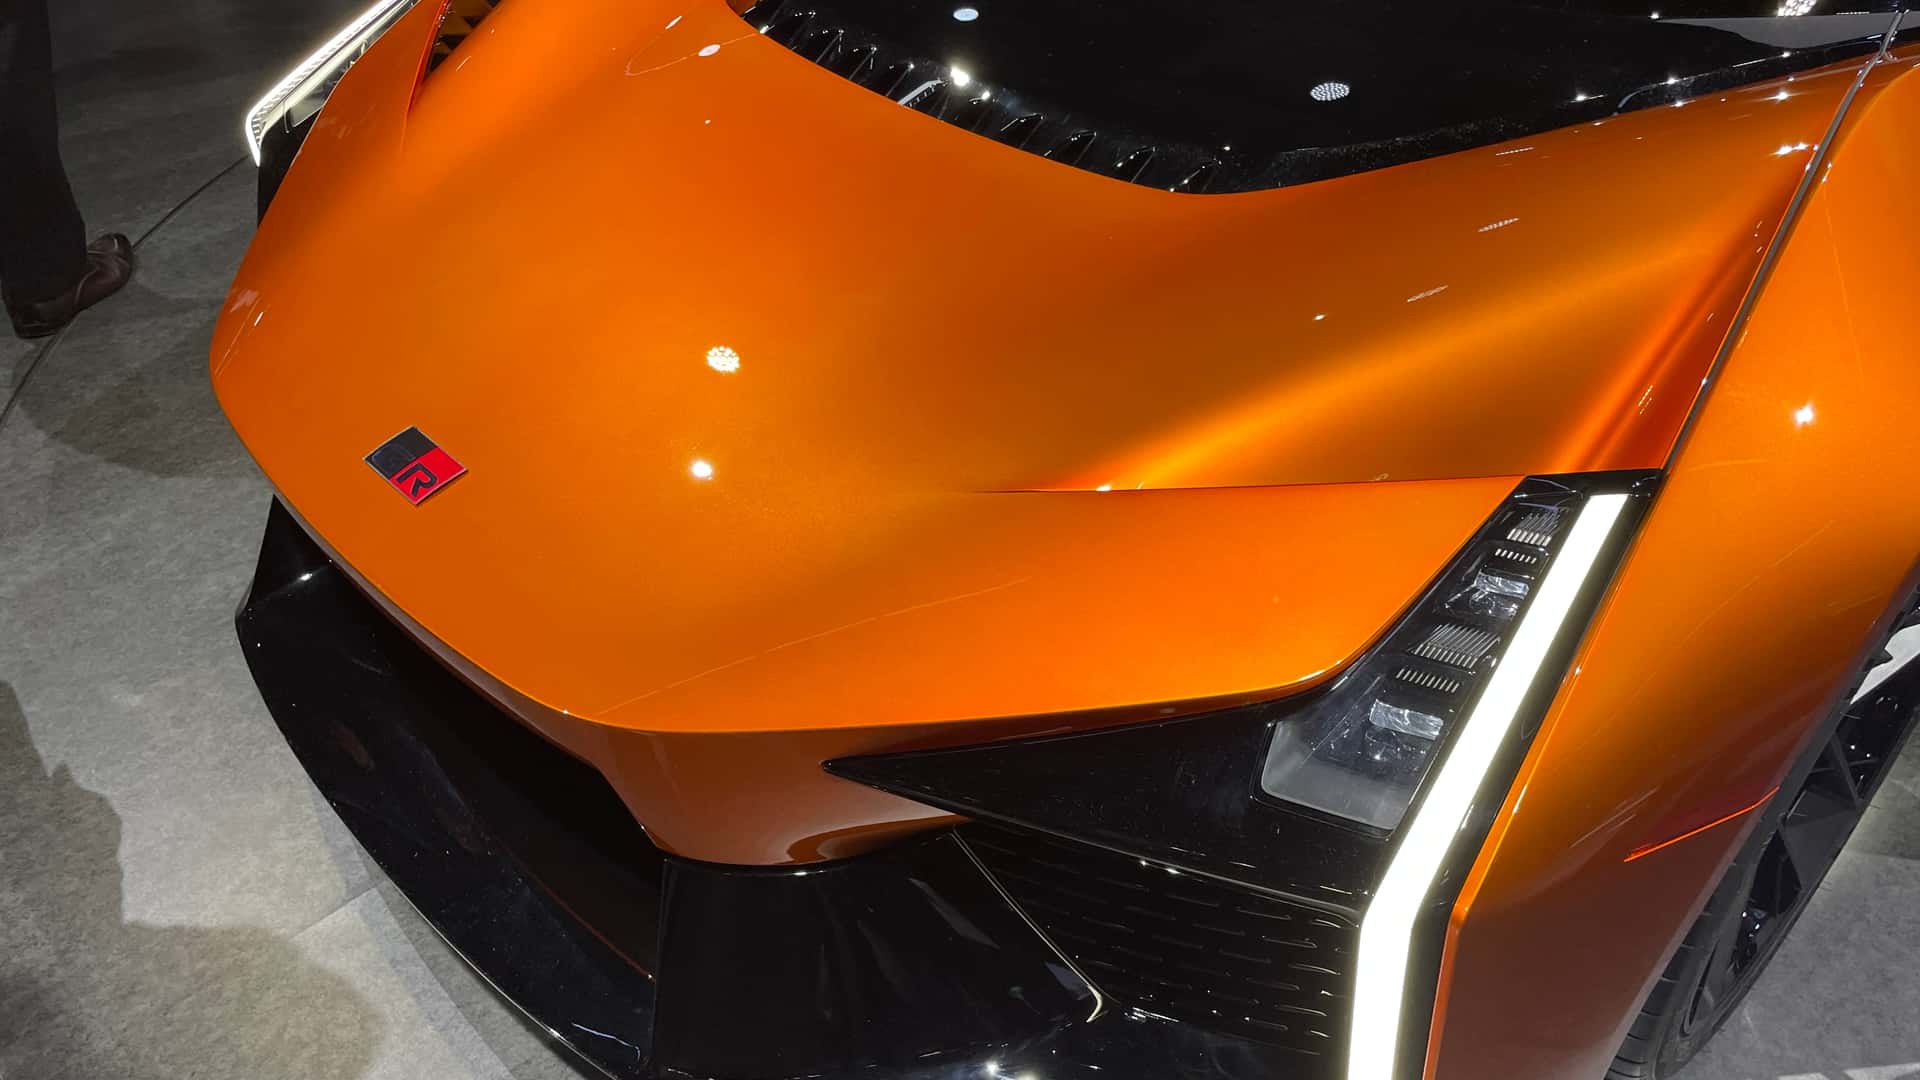 electric toyota ft-se sports car may actually go into production 'after 2026'